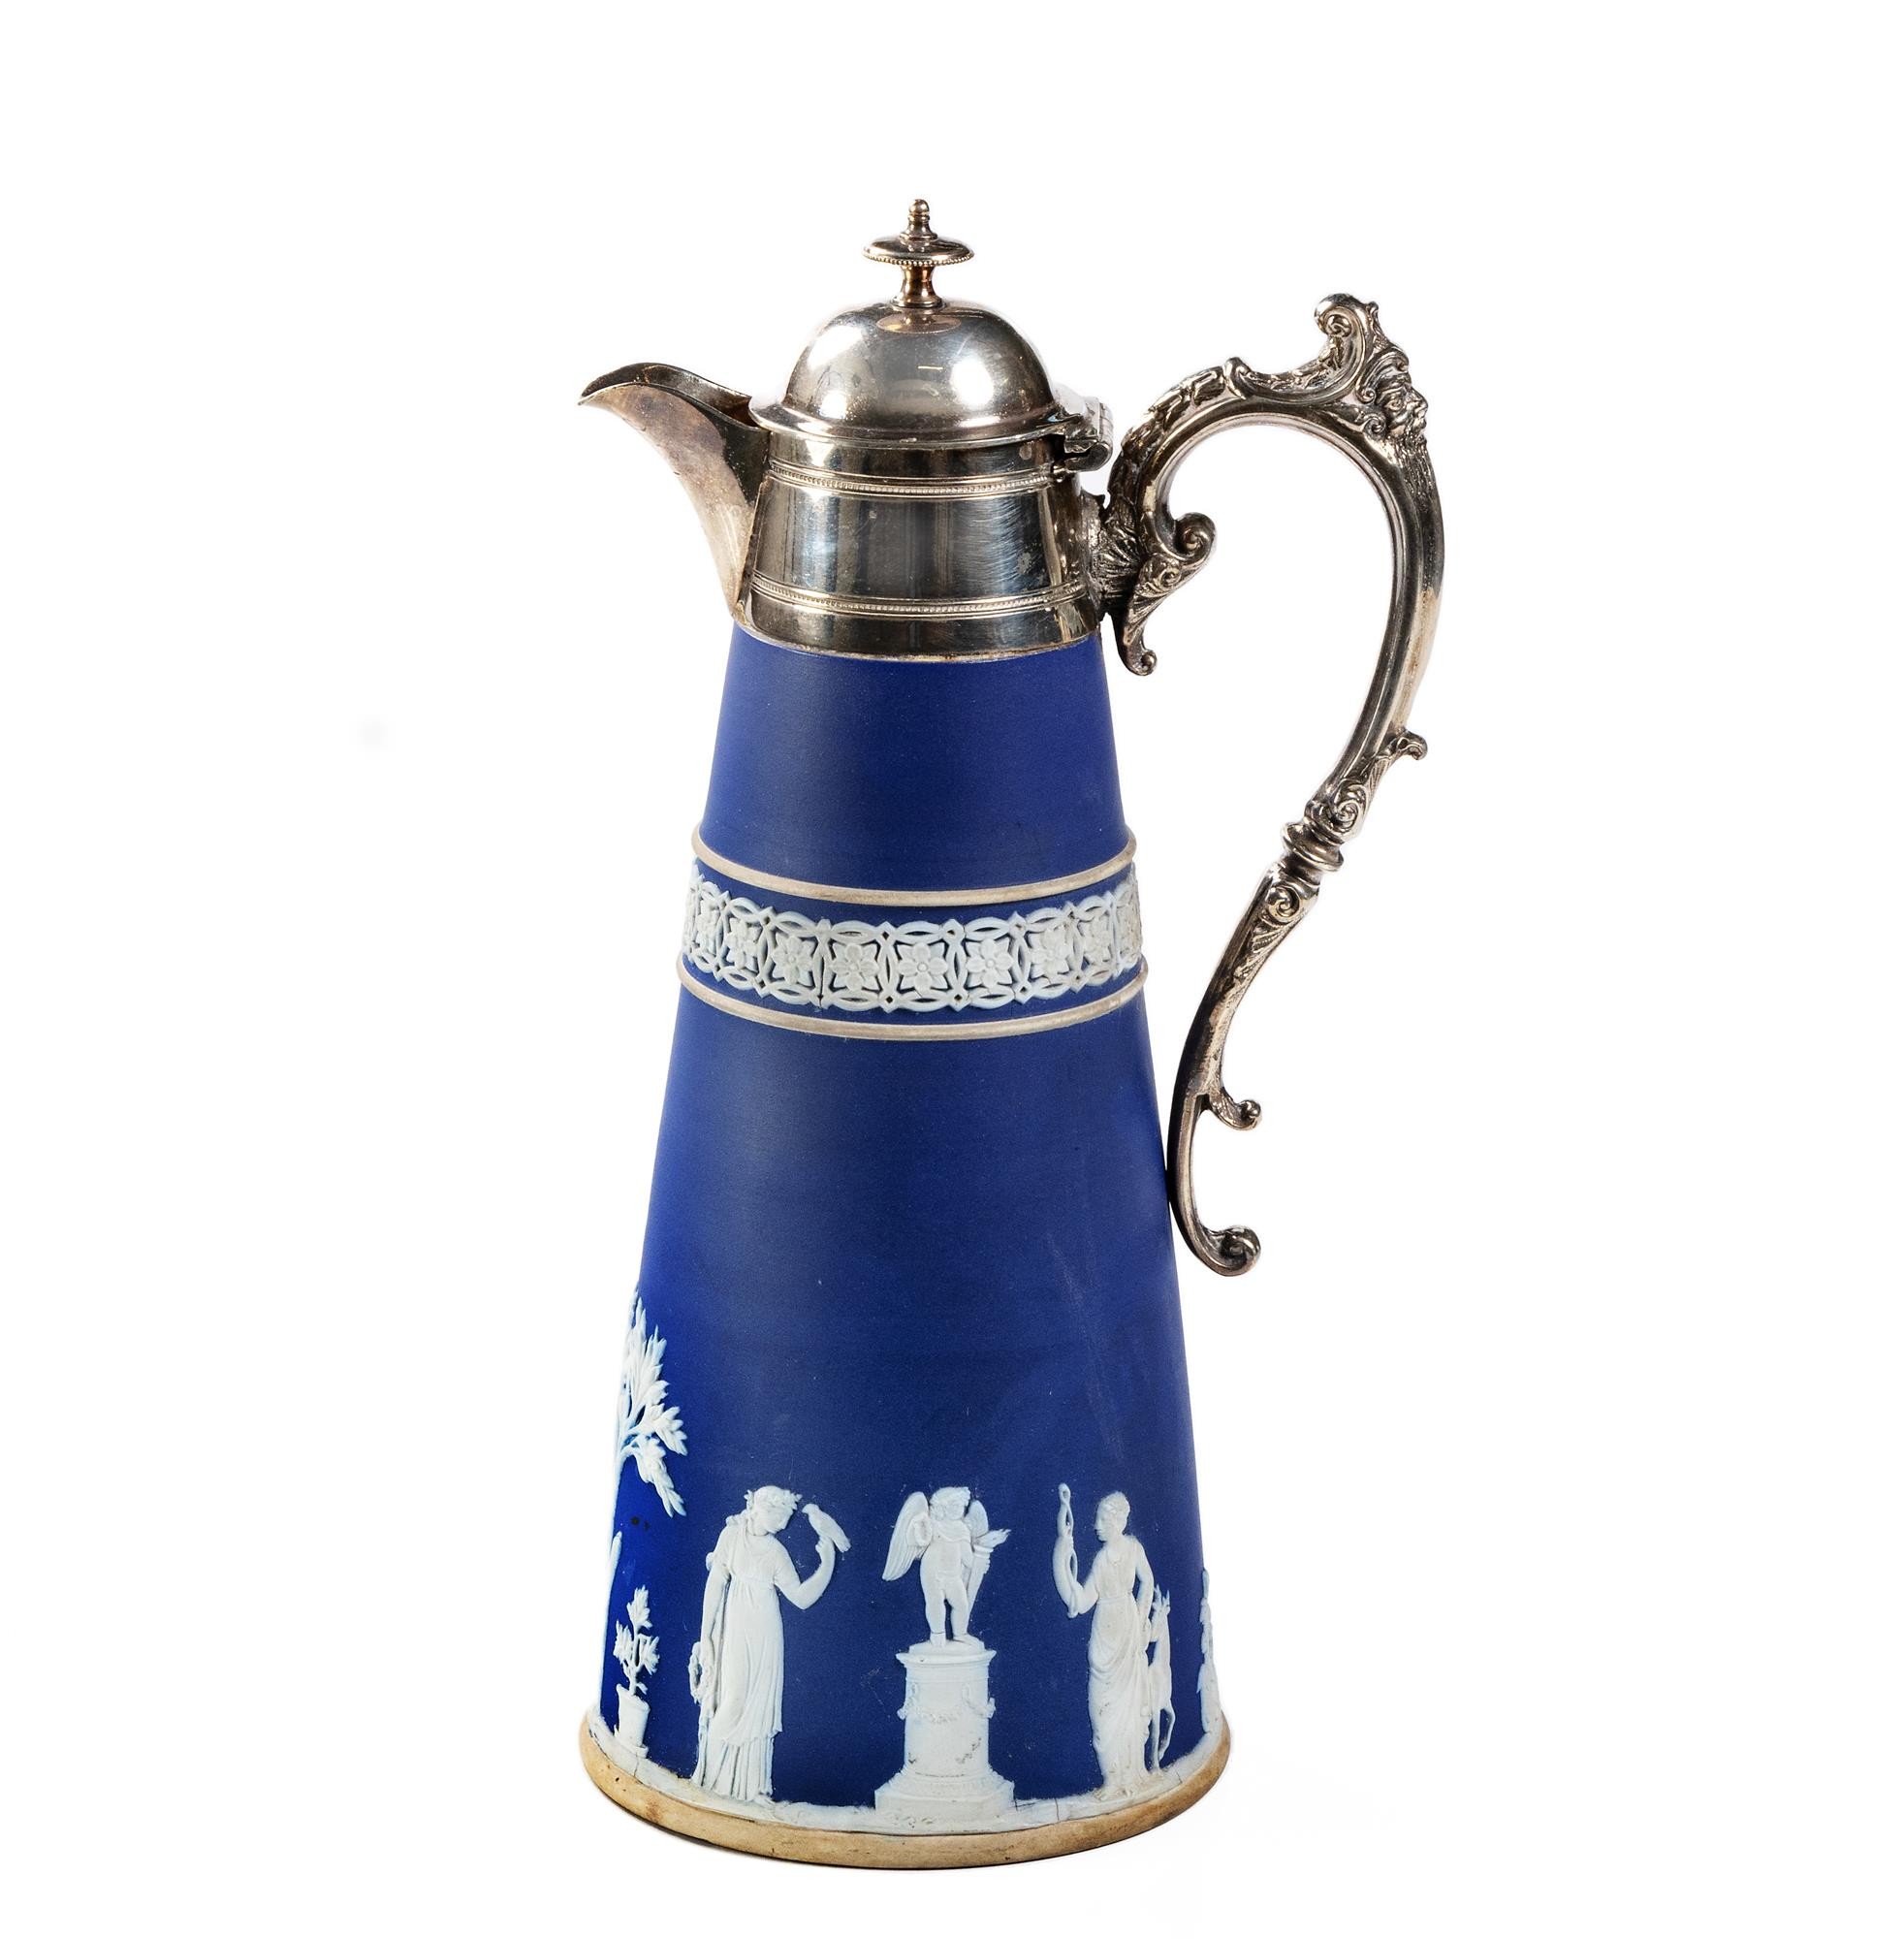 A WEDGWOOD DARK BLUE JASPER WARE CLARET PITCHER WITH SILVERPLATED COVER, CIRCA 1900